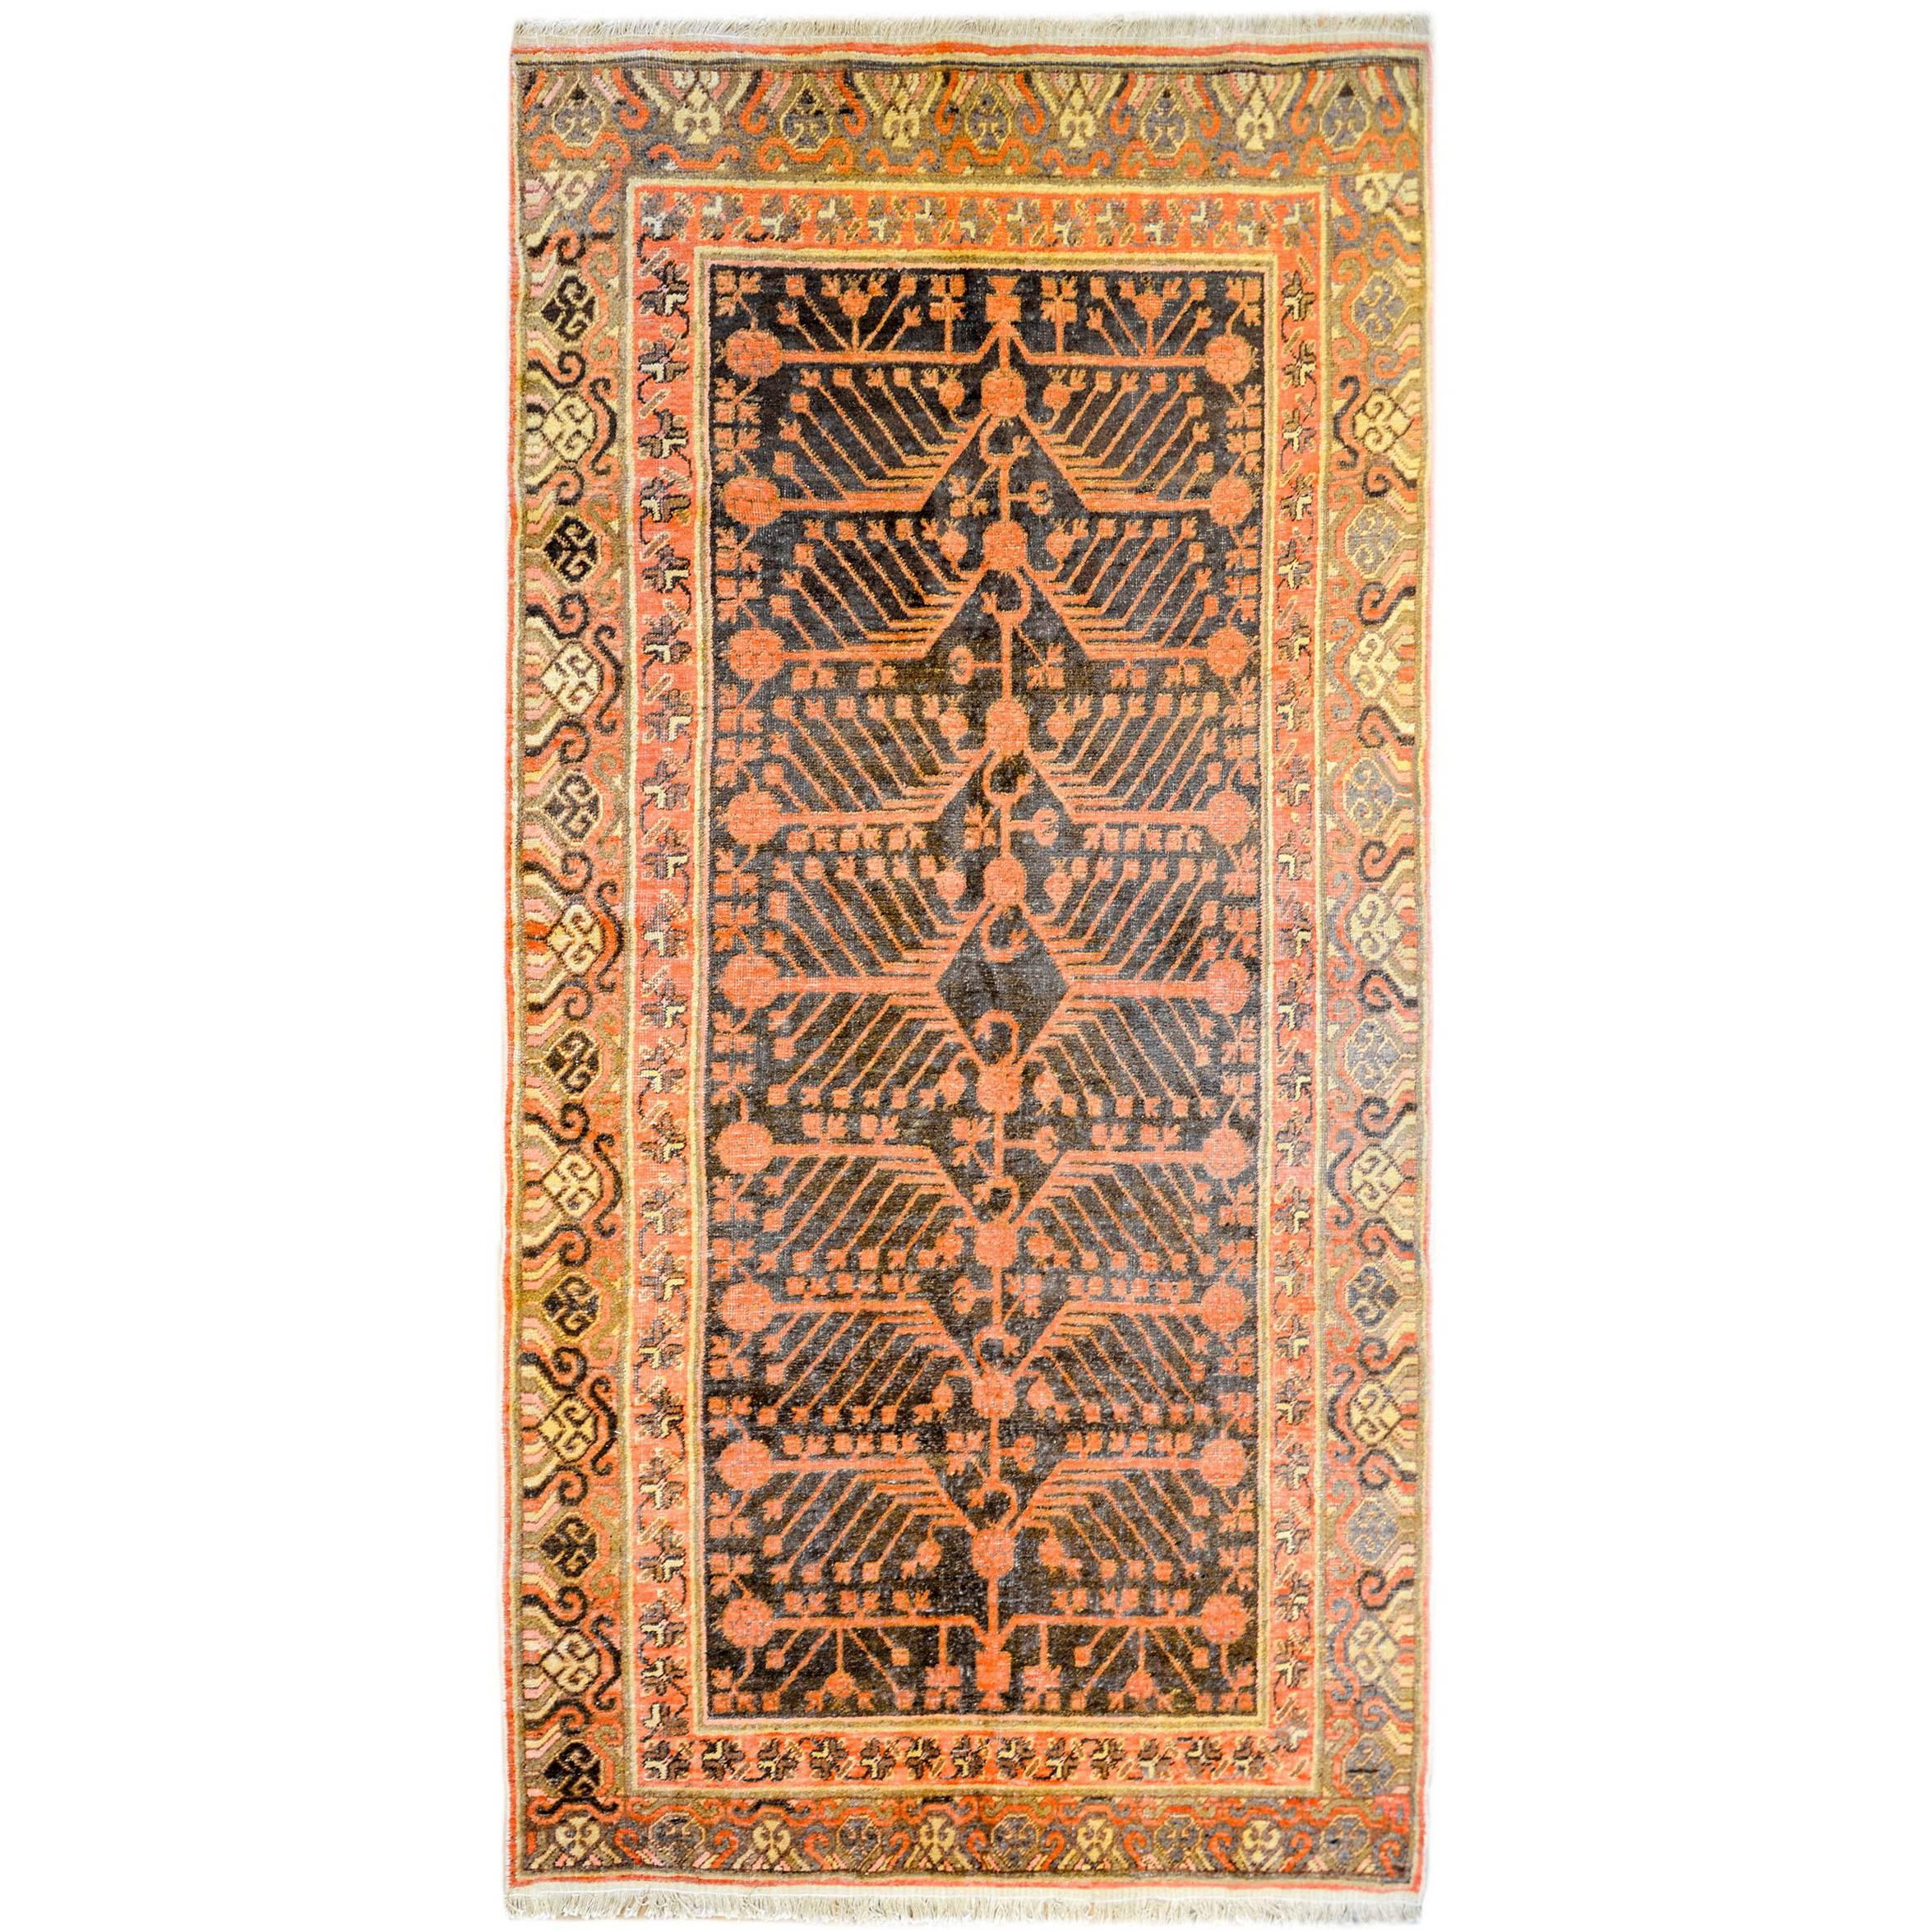 Why are Persian rugs so expensive?